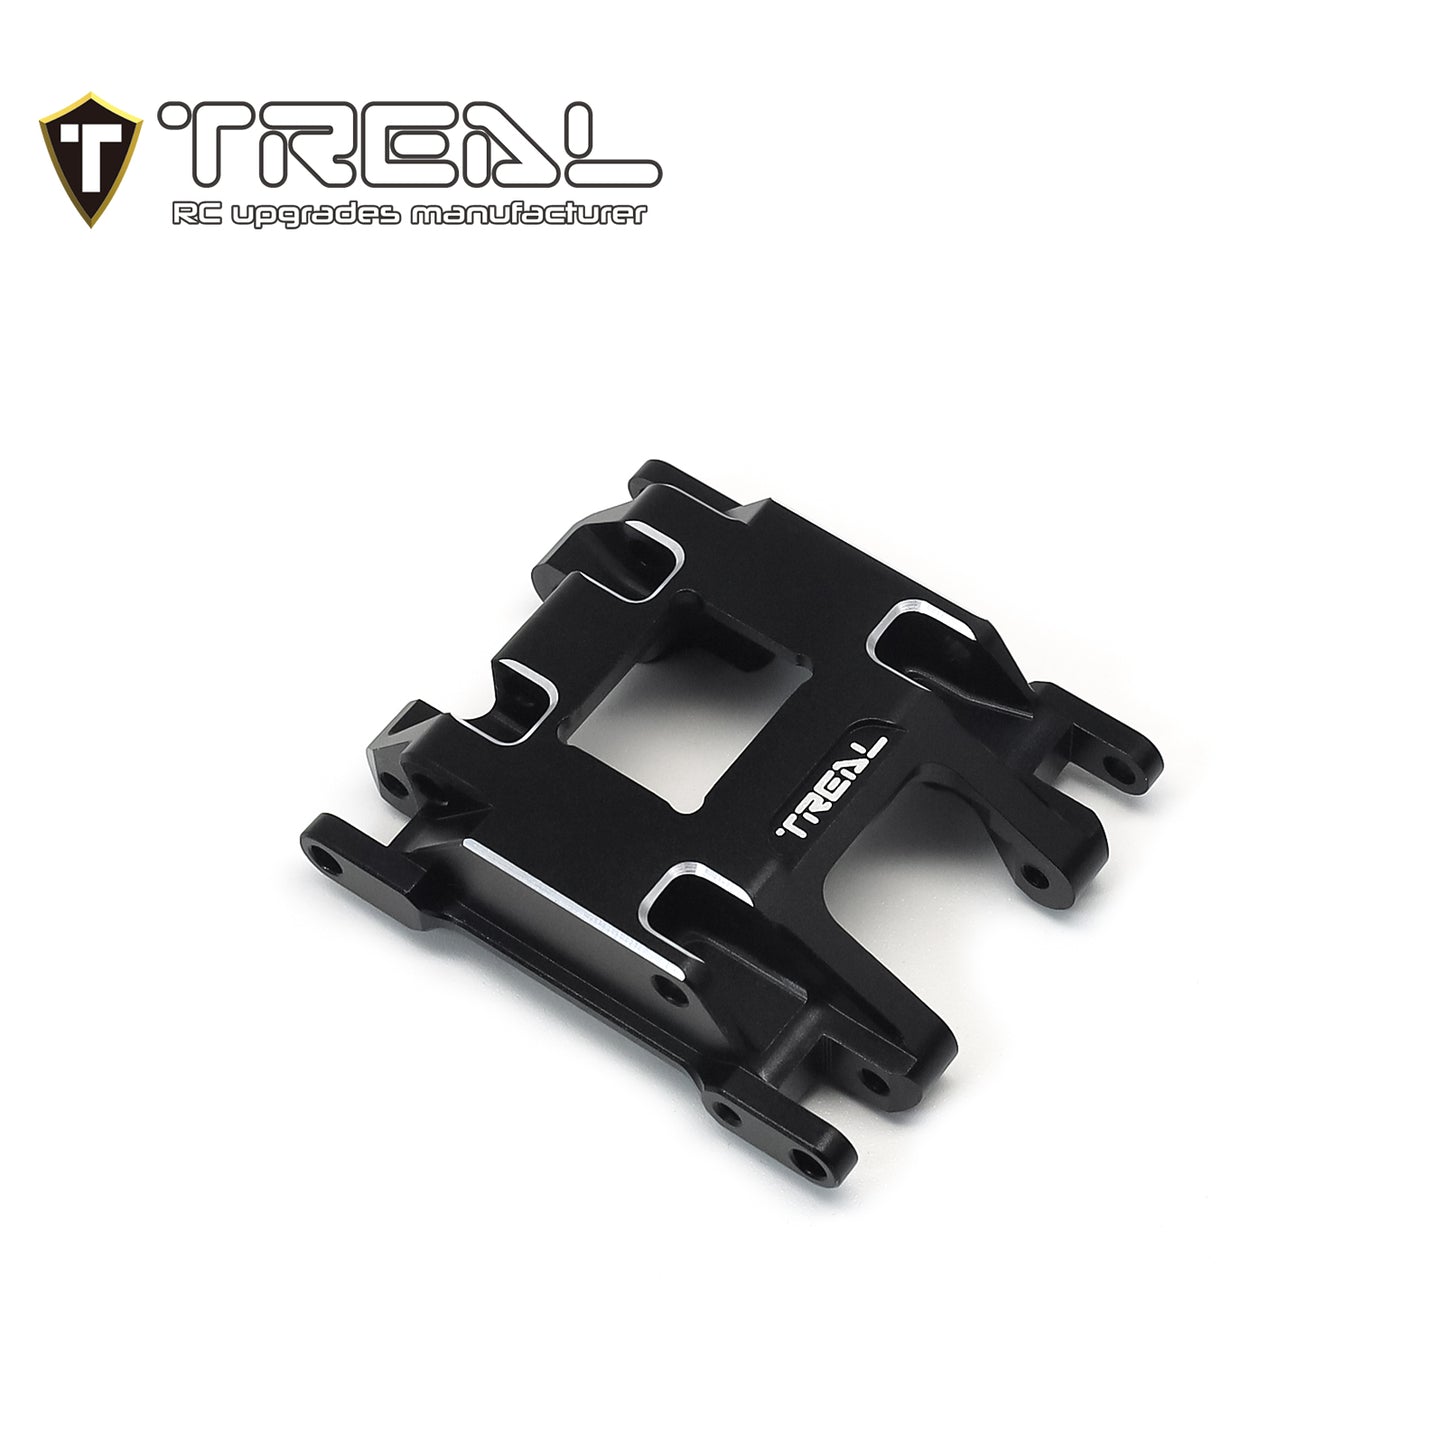 TREAL Aluminum 7075 Center Skid Plate CNC Machined Upgrdes for 1/18 TRX4M